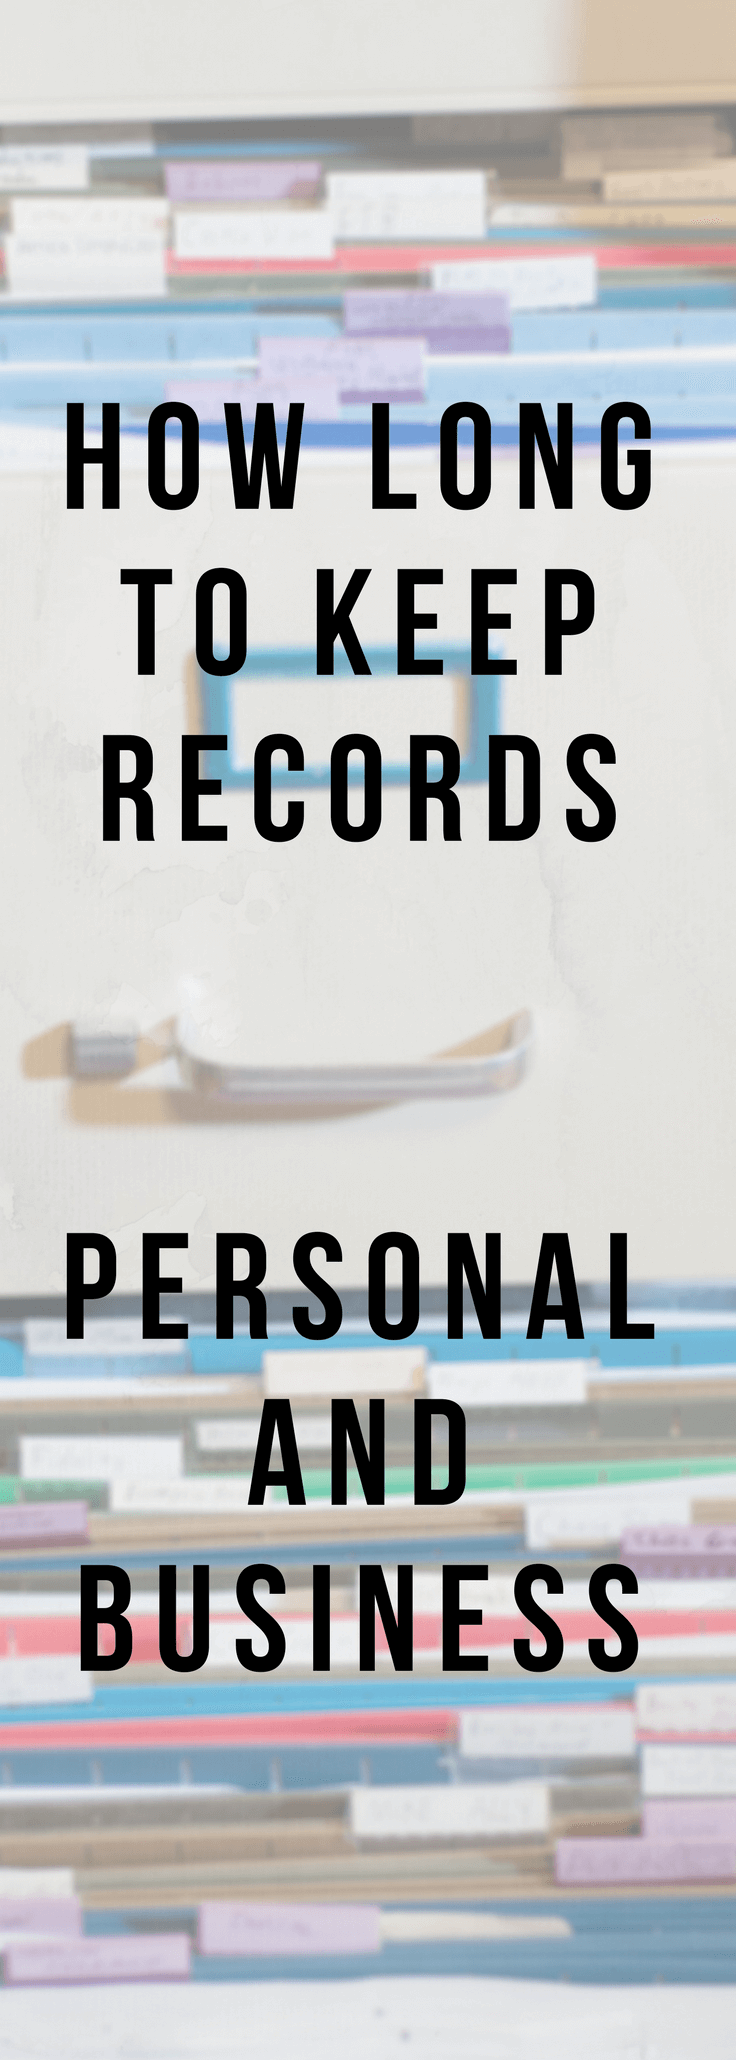 How long to keep records - personal and business pinterest